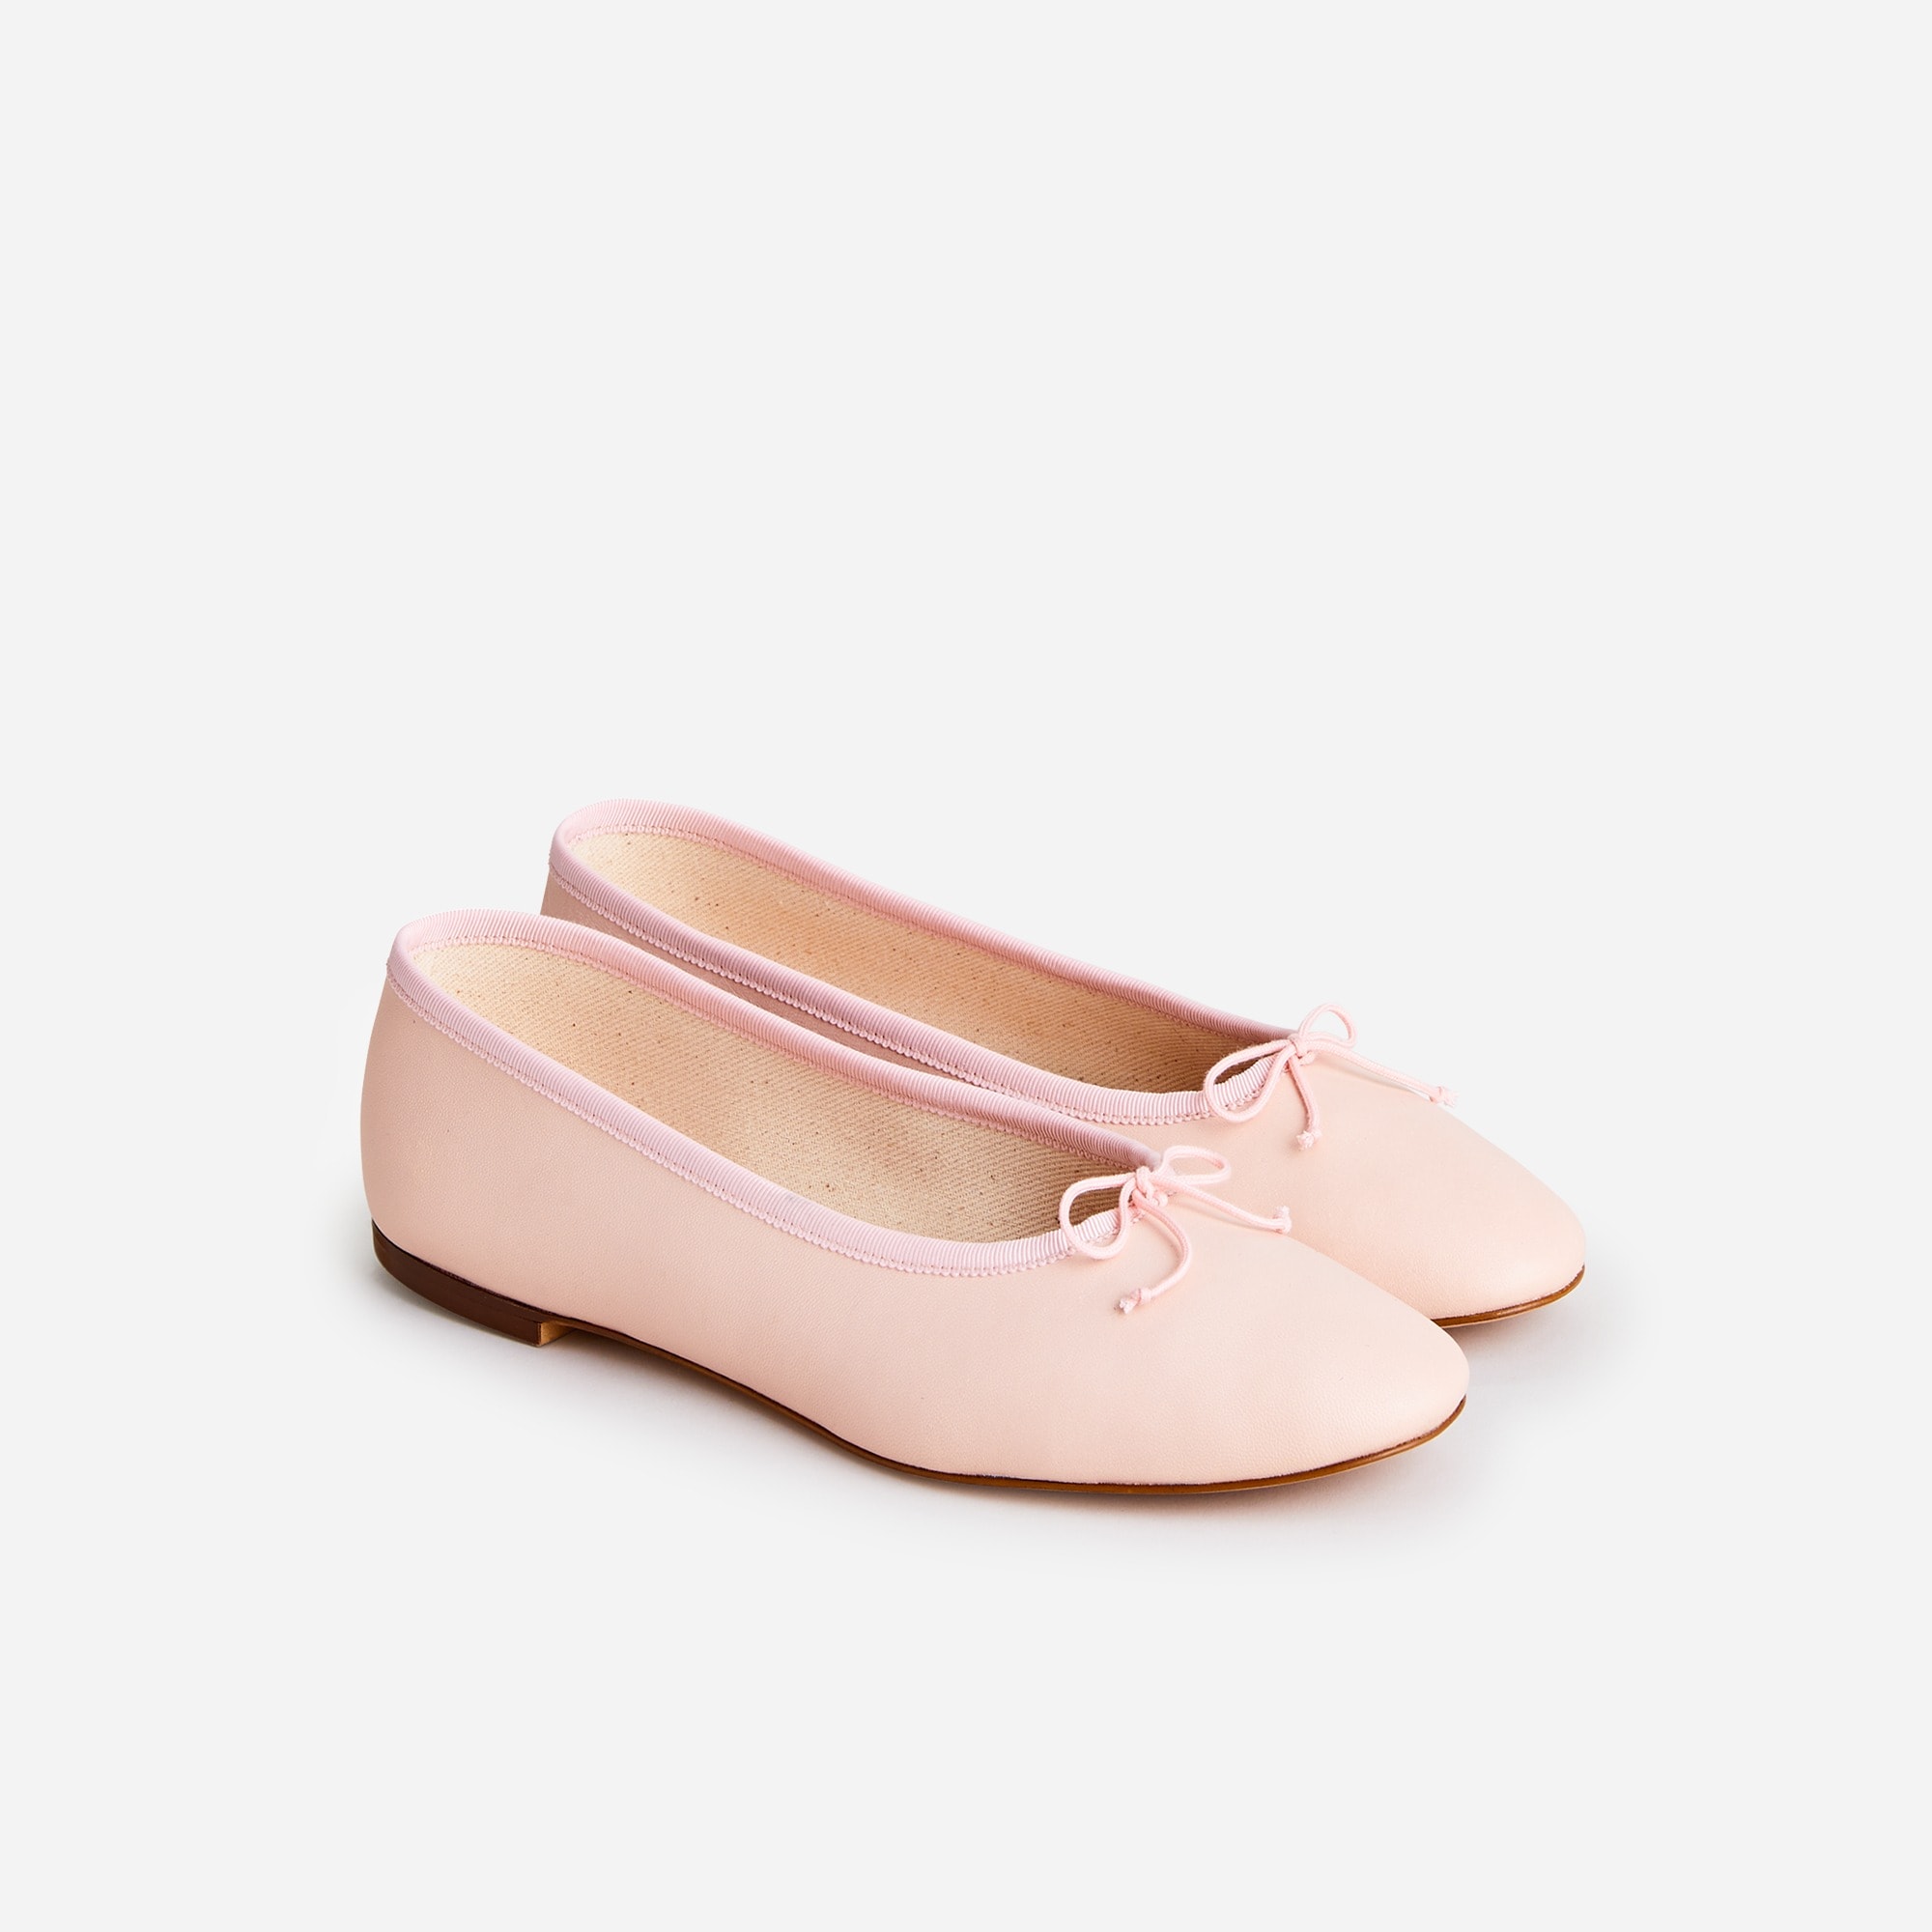  Zoe ballet flats in leather